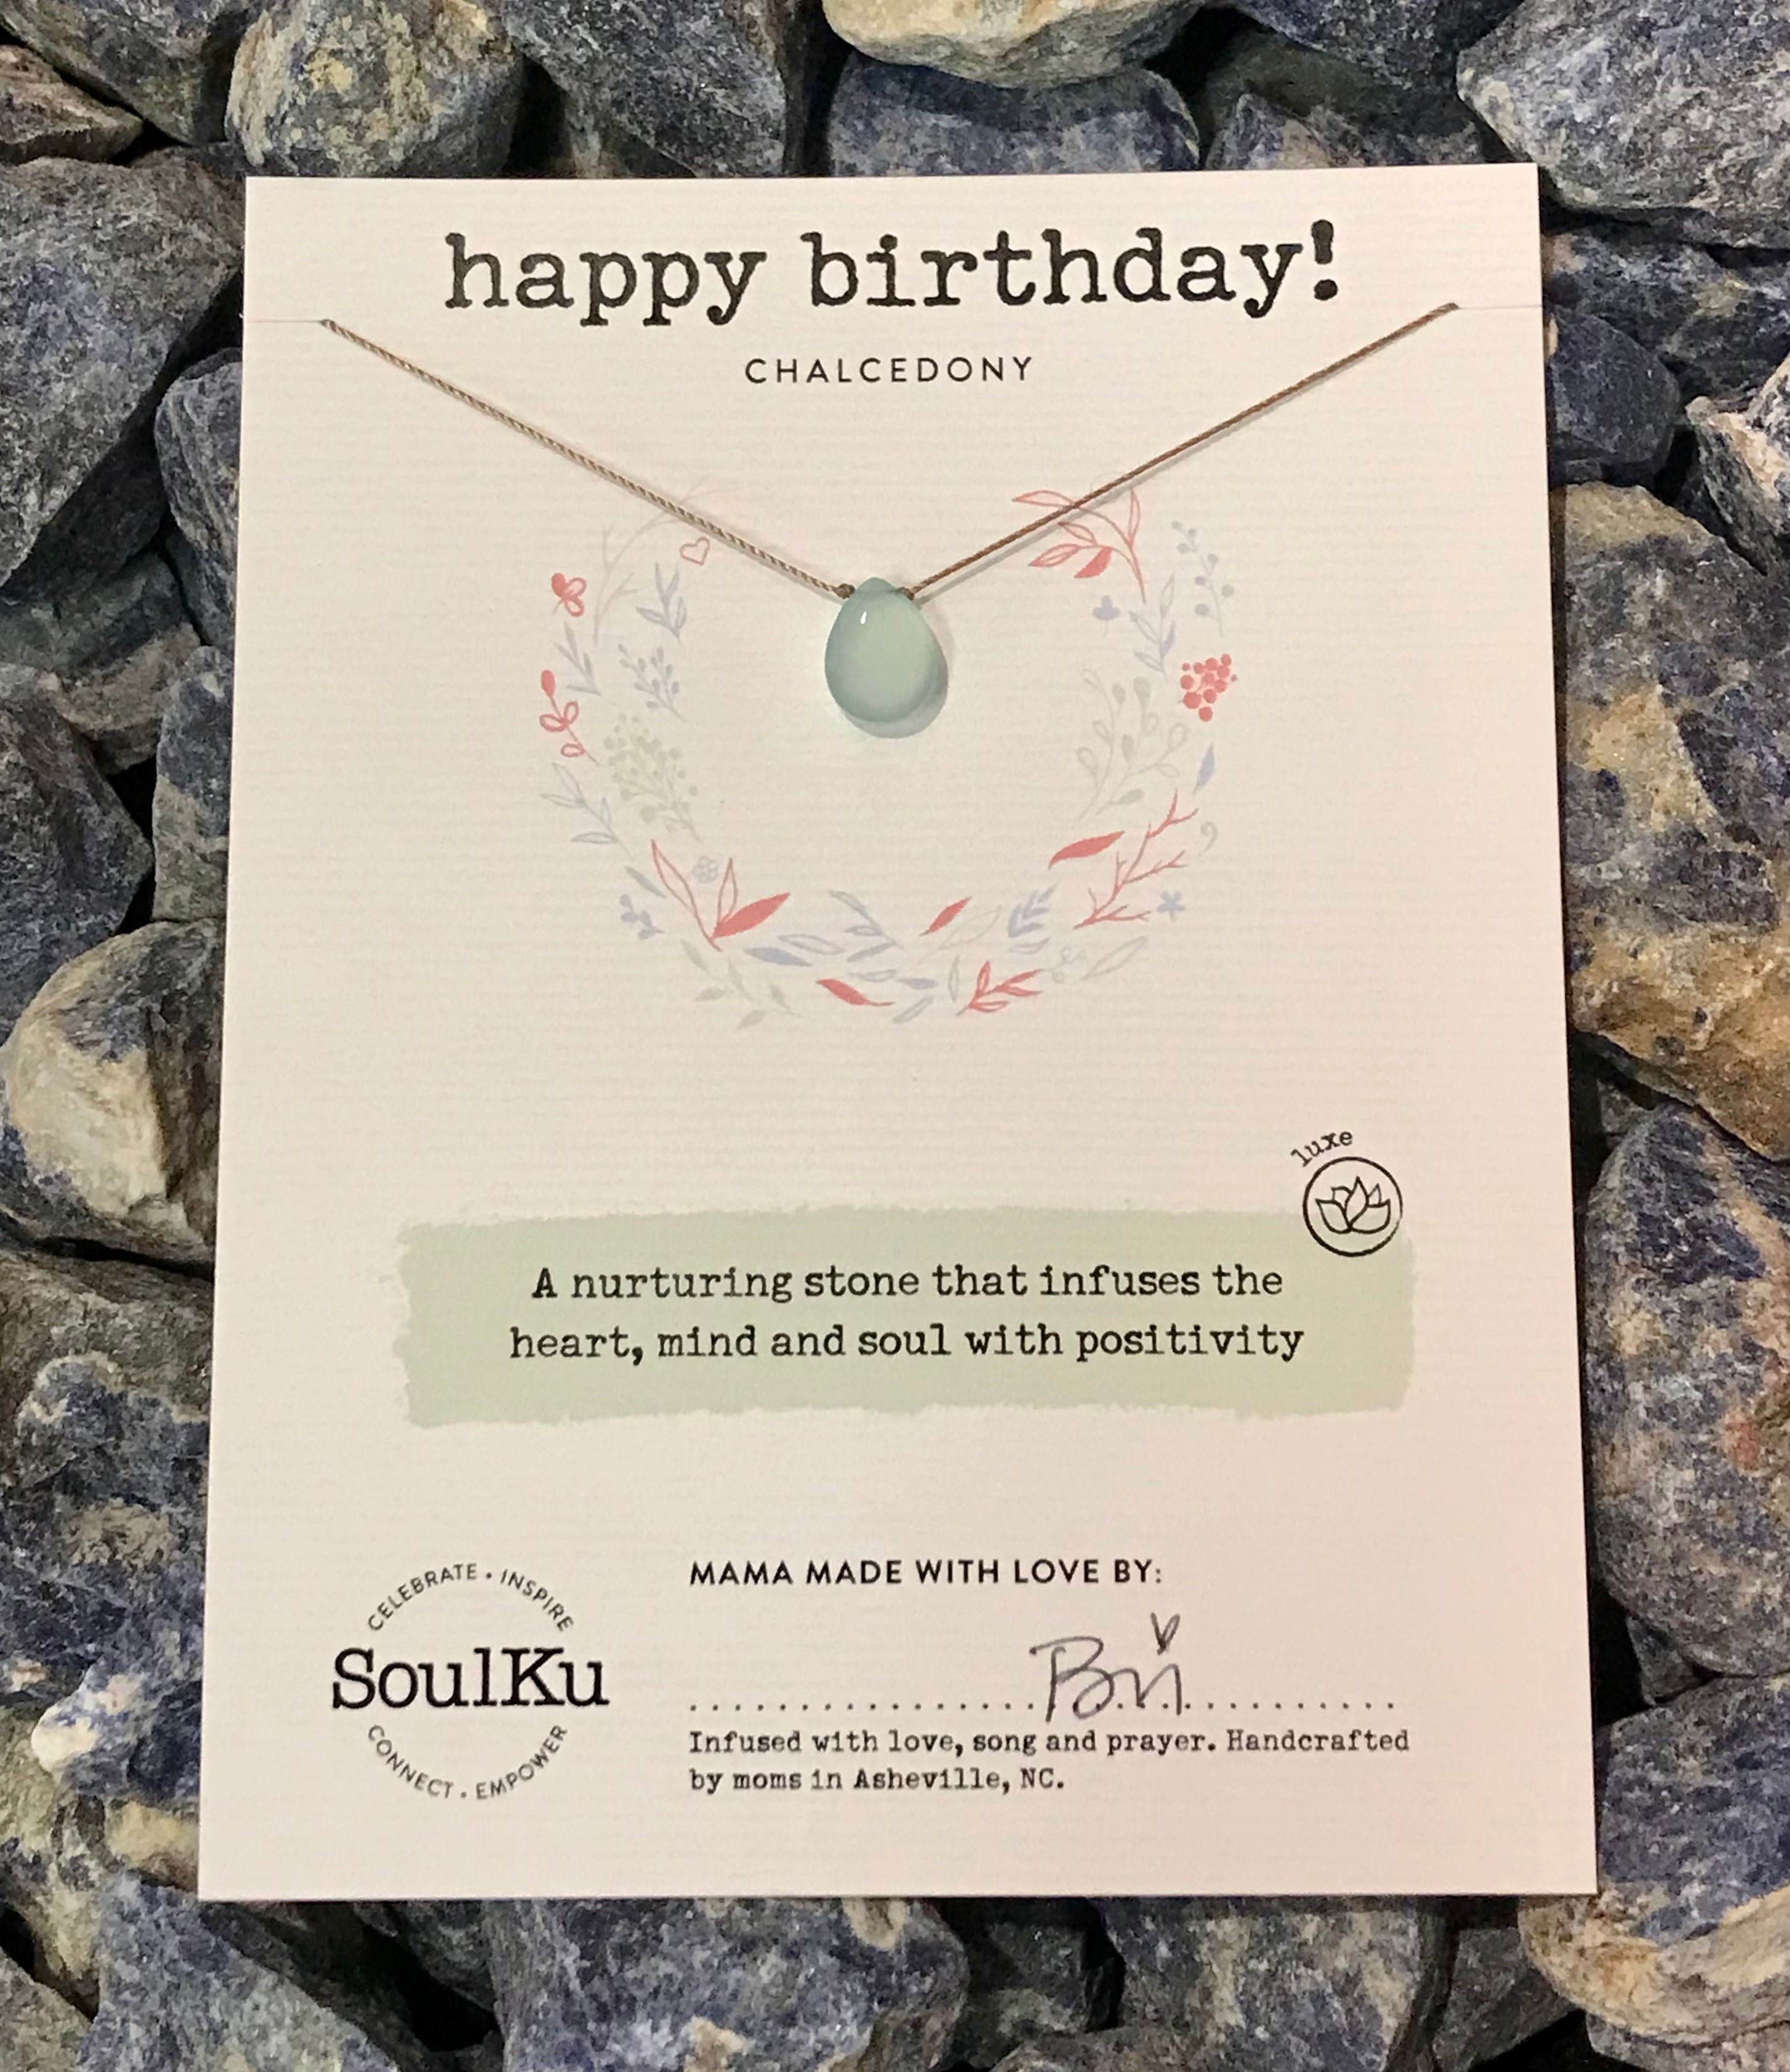 SoulKu Chalcedony Luxe Necklace for Happy Birthday